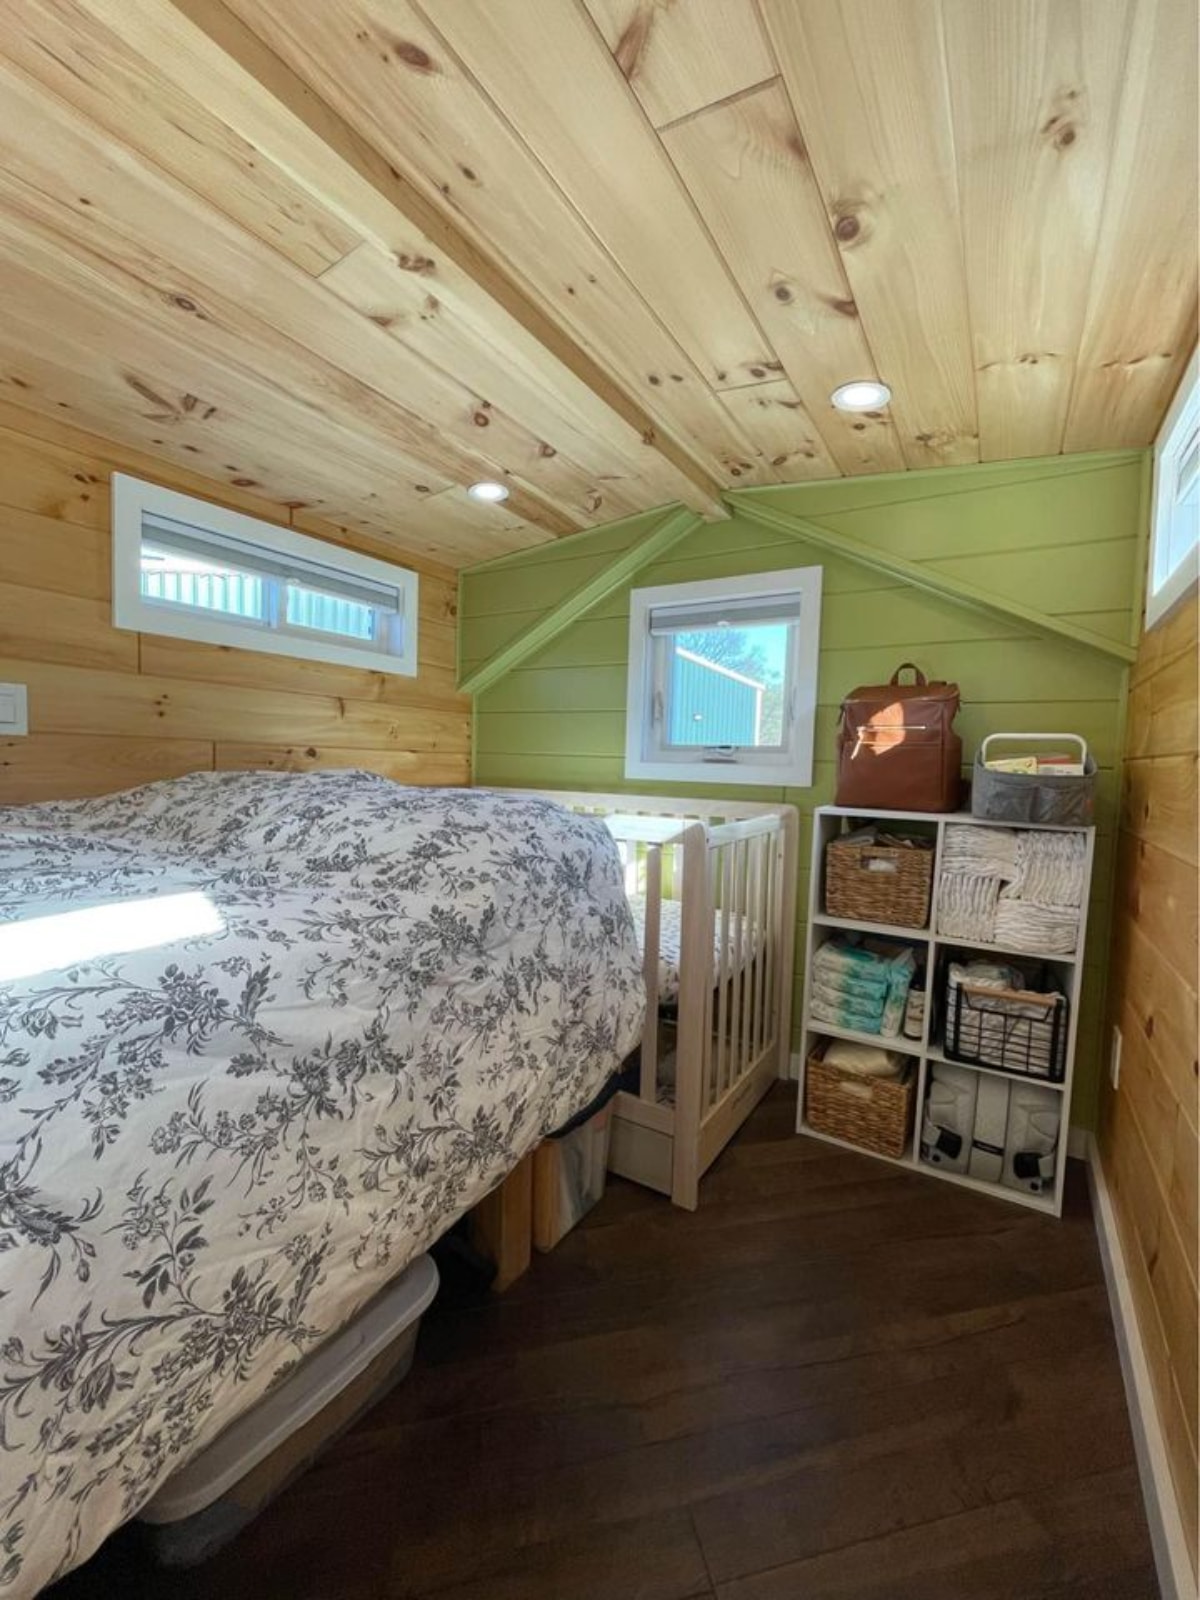 Loft bedroom of 40' Tiny House has comfortable queen bed, a crib, small rack for clothes and few stuffs